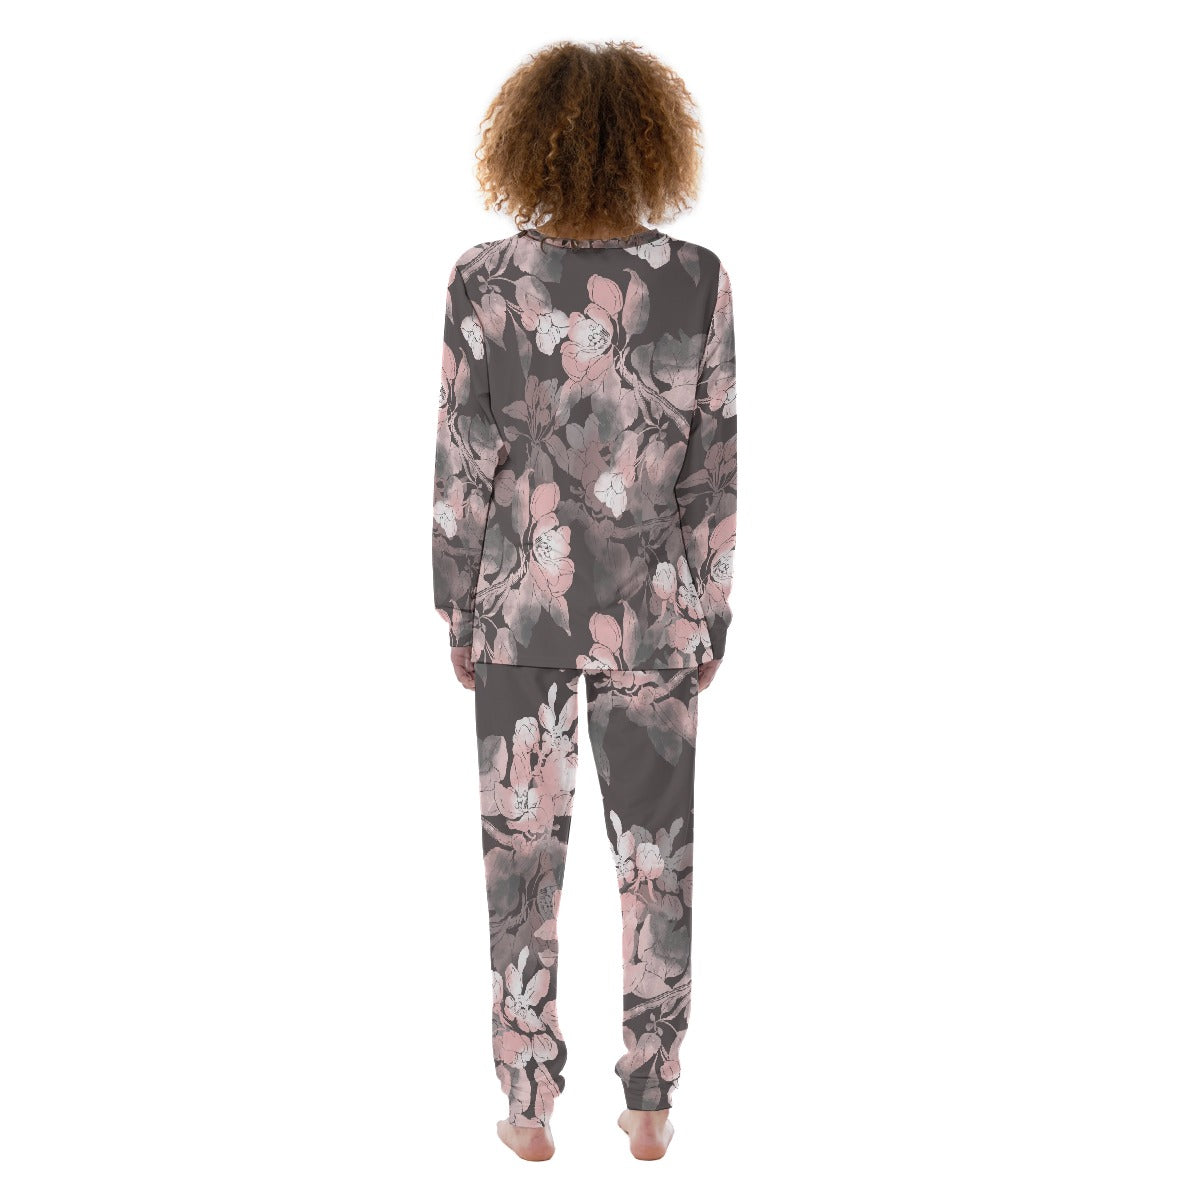 Grey and Pin All-Over Print Women's Pajamas